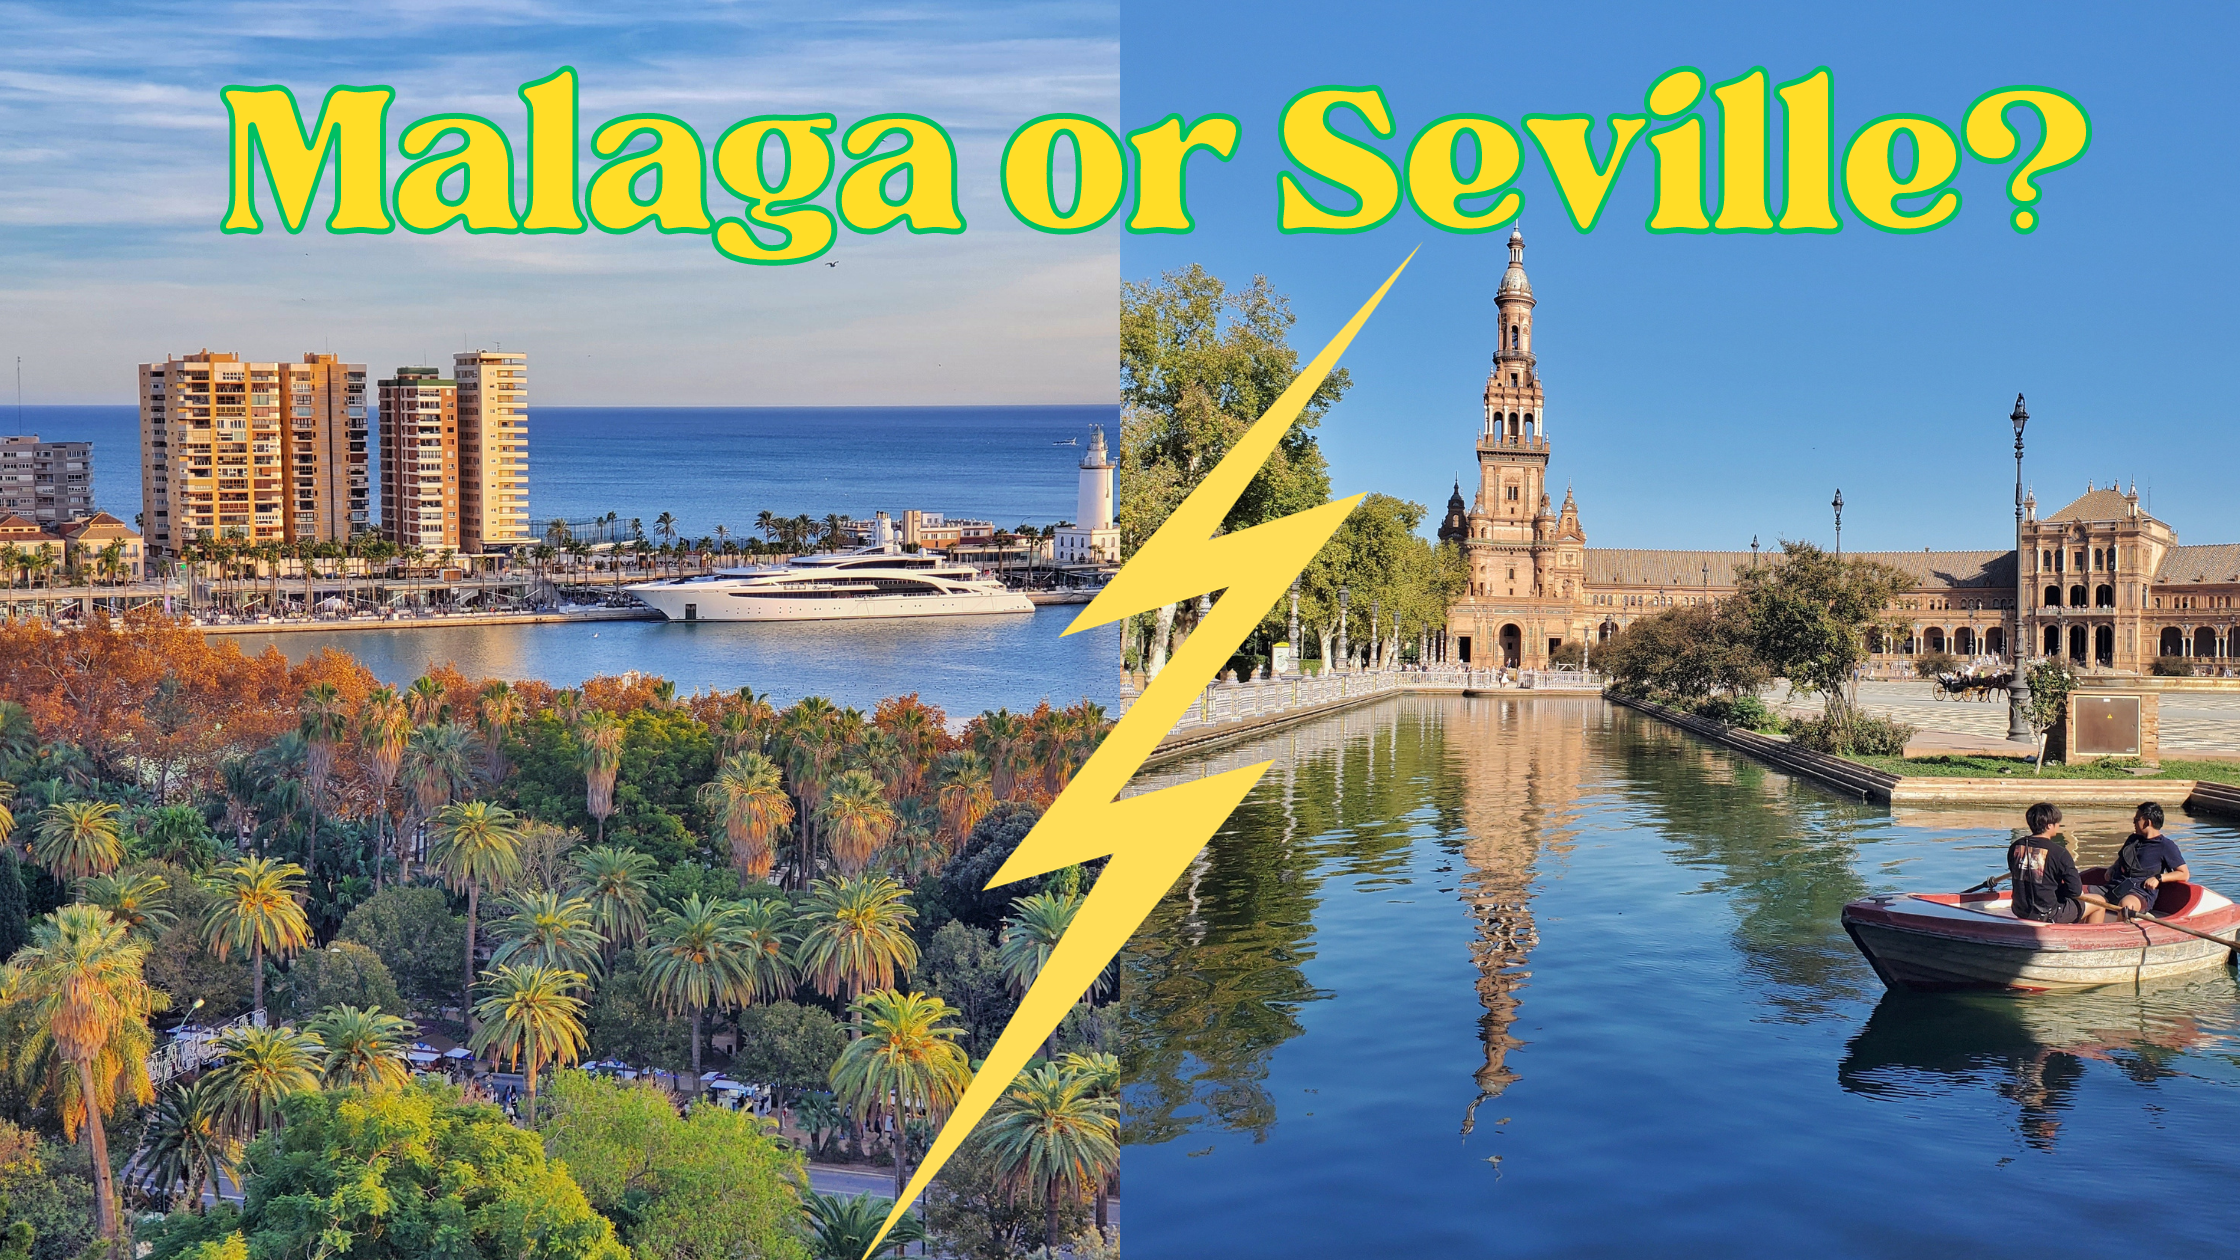 Yellow writing: Malaga or Seville. yellow lightning bolt splitting a photo of Malaga on left (trees, water, large yacht and modern buildings) and a photo of Sevilla (plaza de españa and people in a rowing boat on the canal there